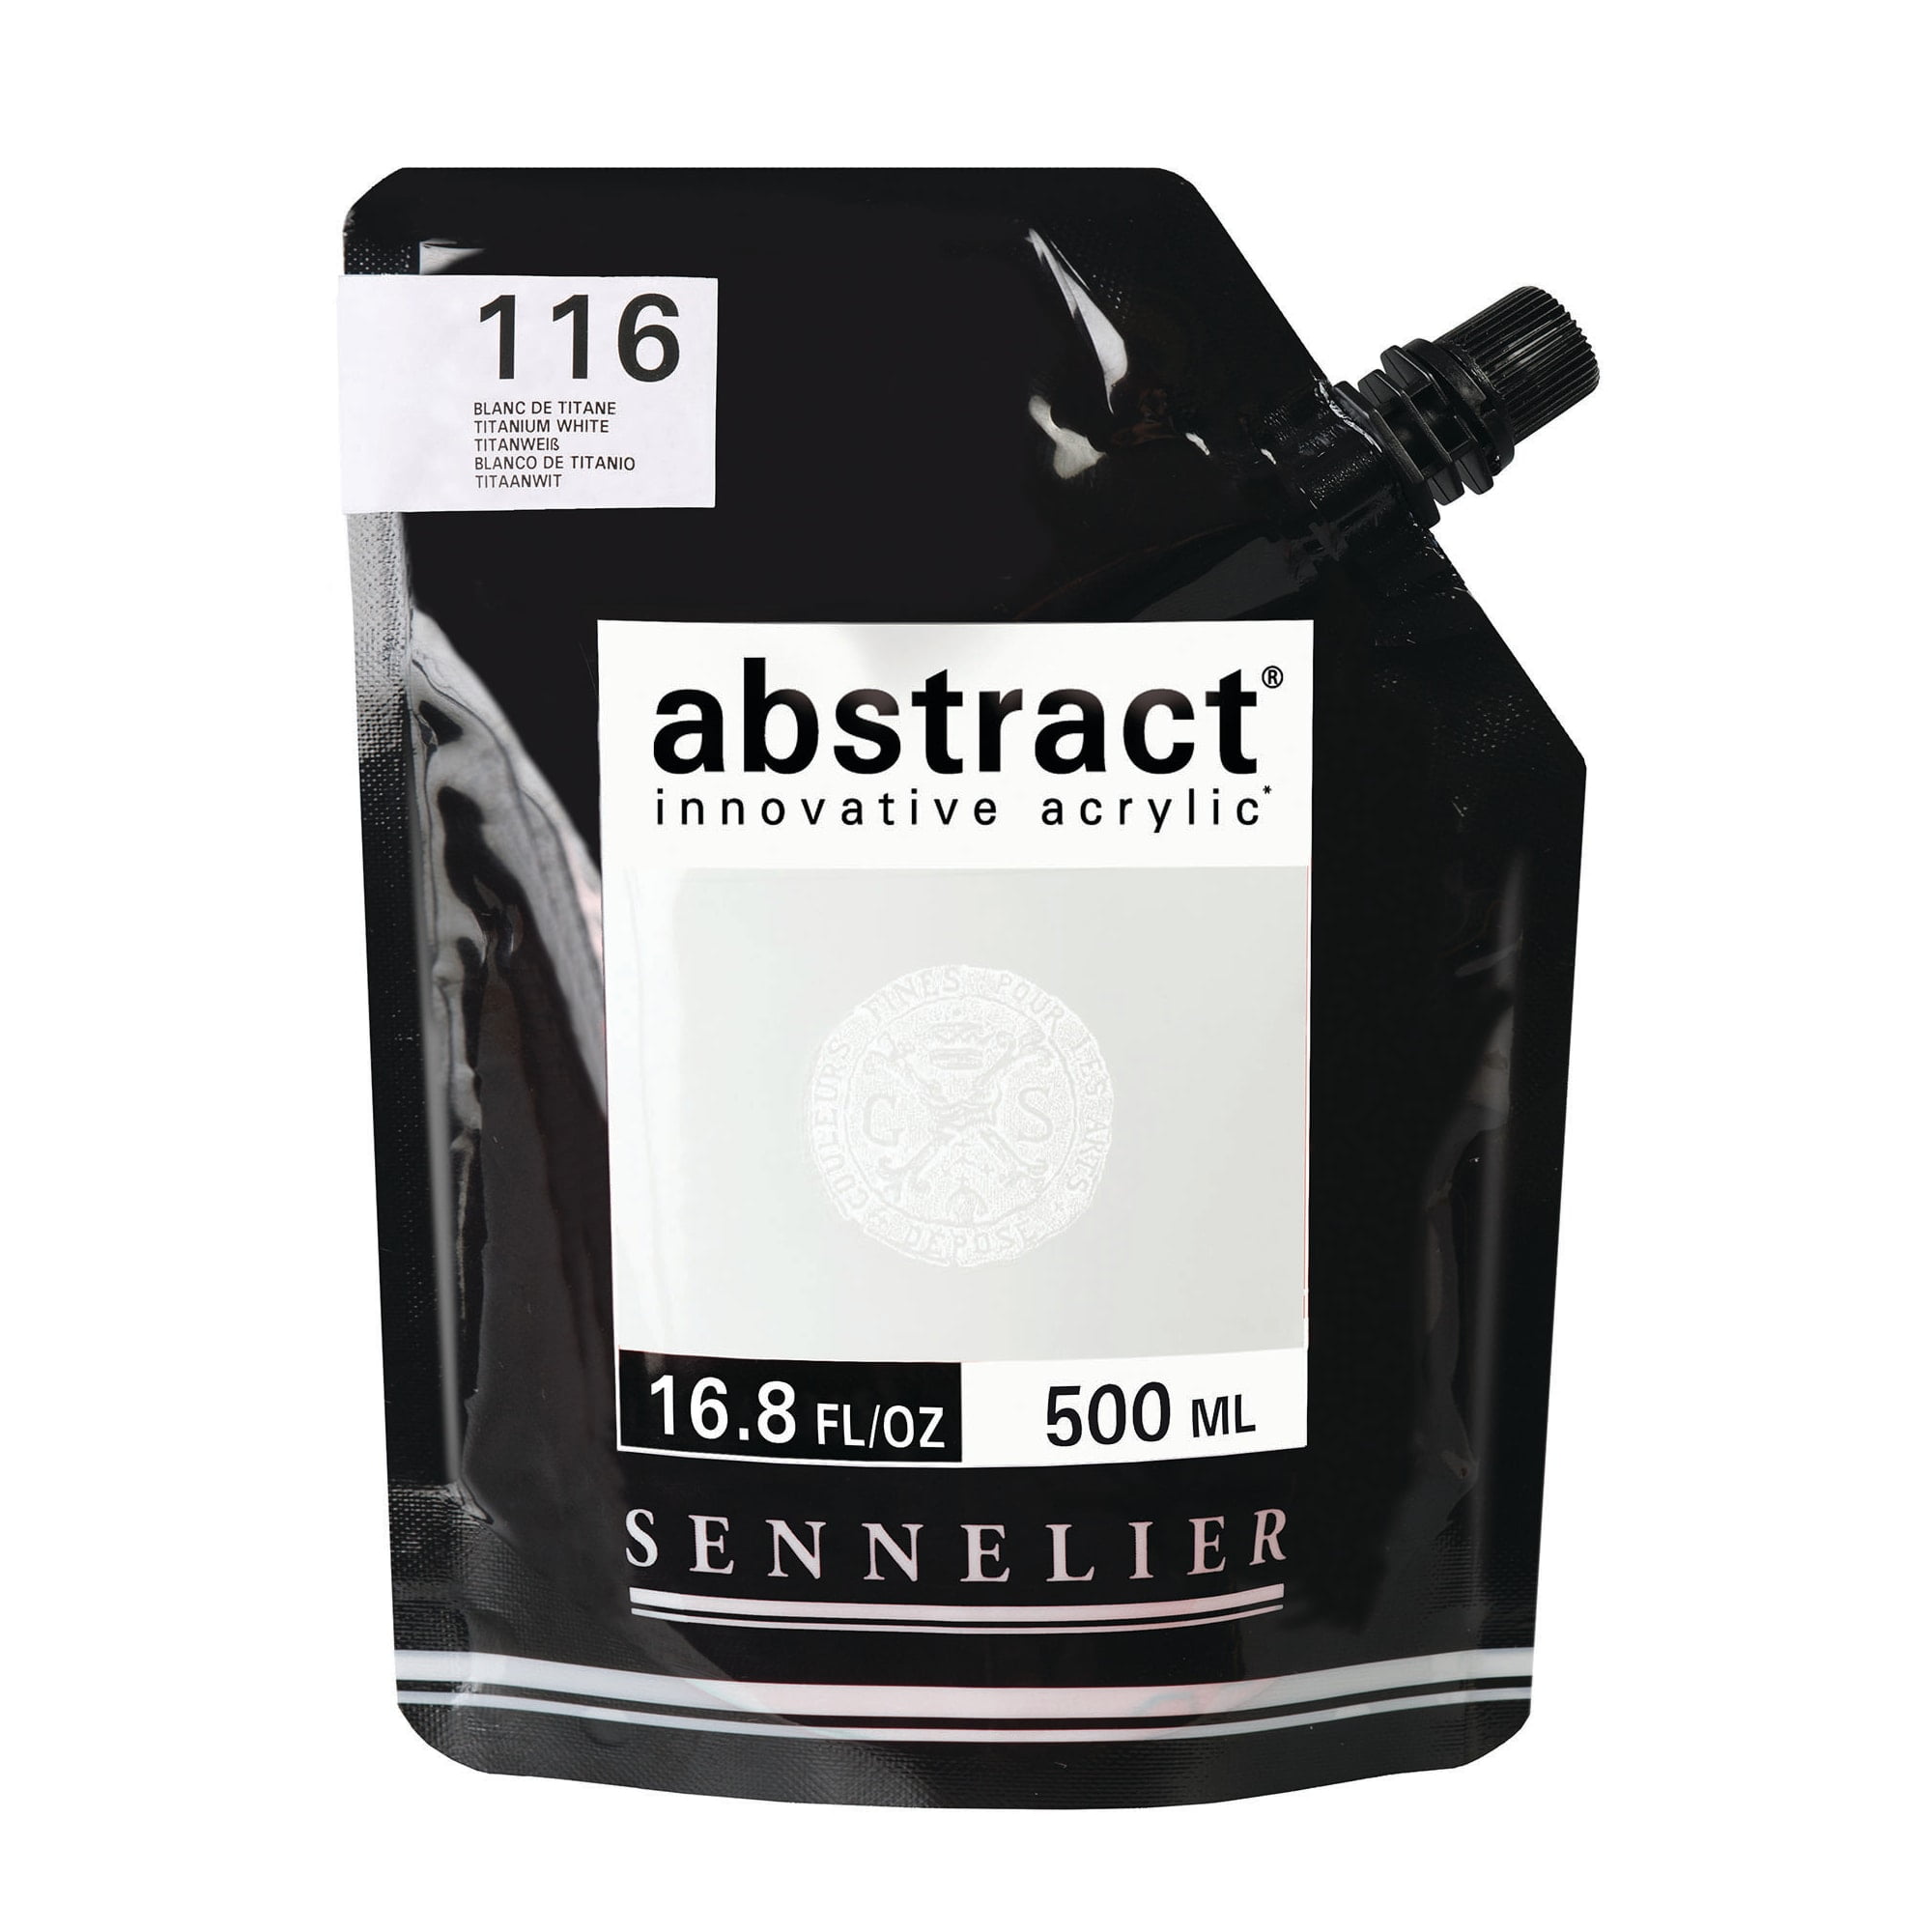 Sennelier Abstract Acrylic Gesso - White, 500 ml